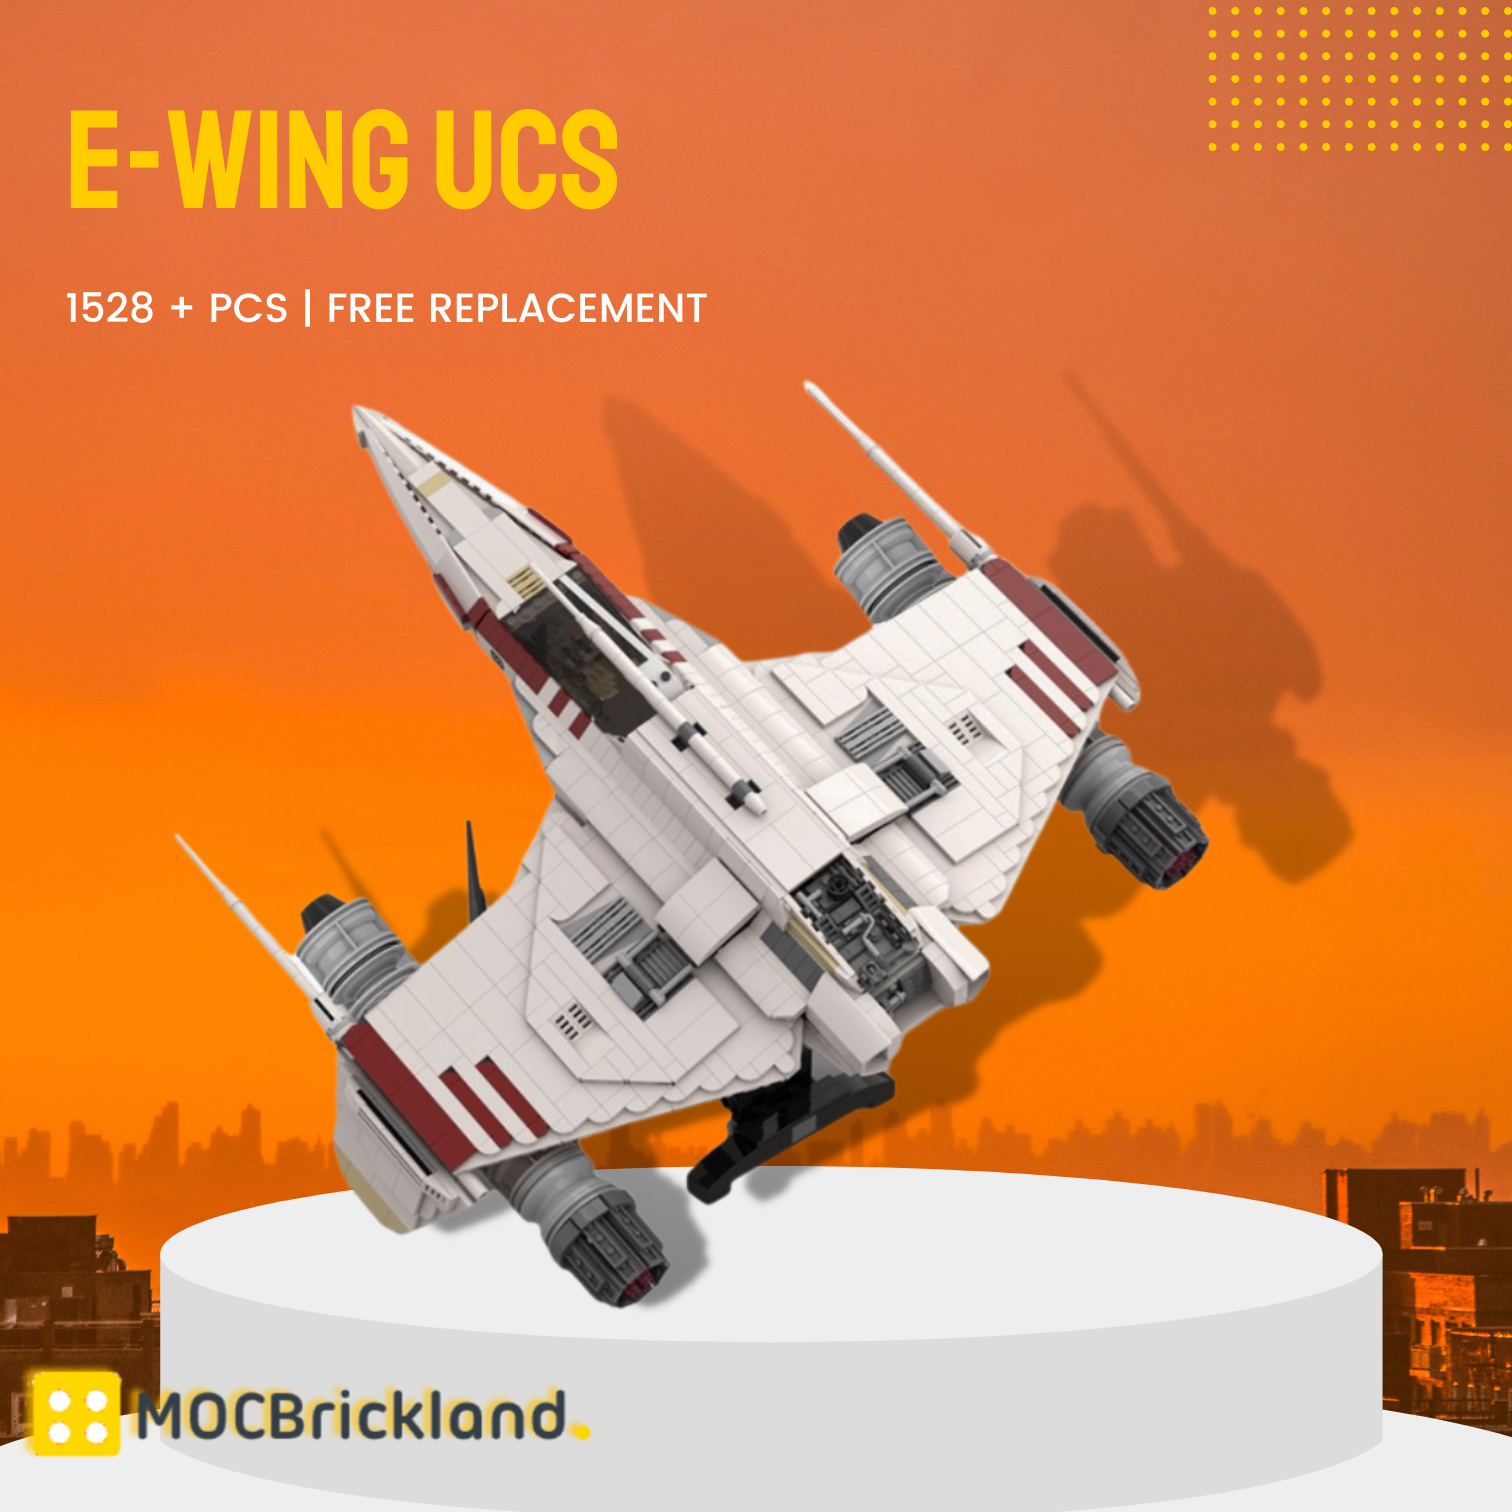 E-WING UCS MOC-127180 Star Wars With 1528 Pieces